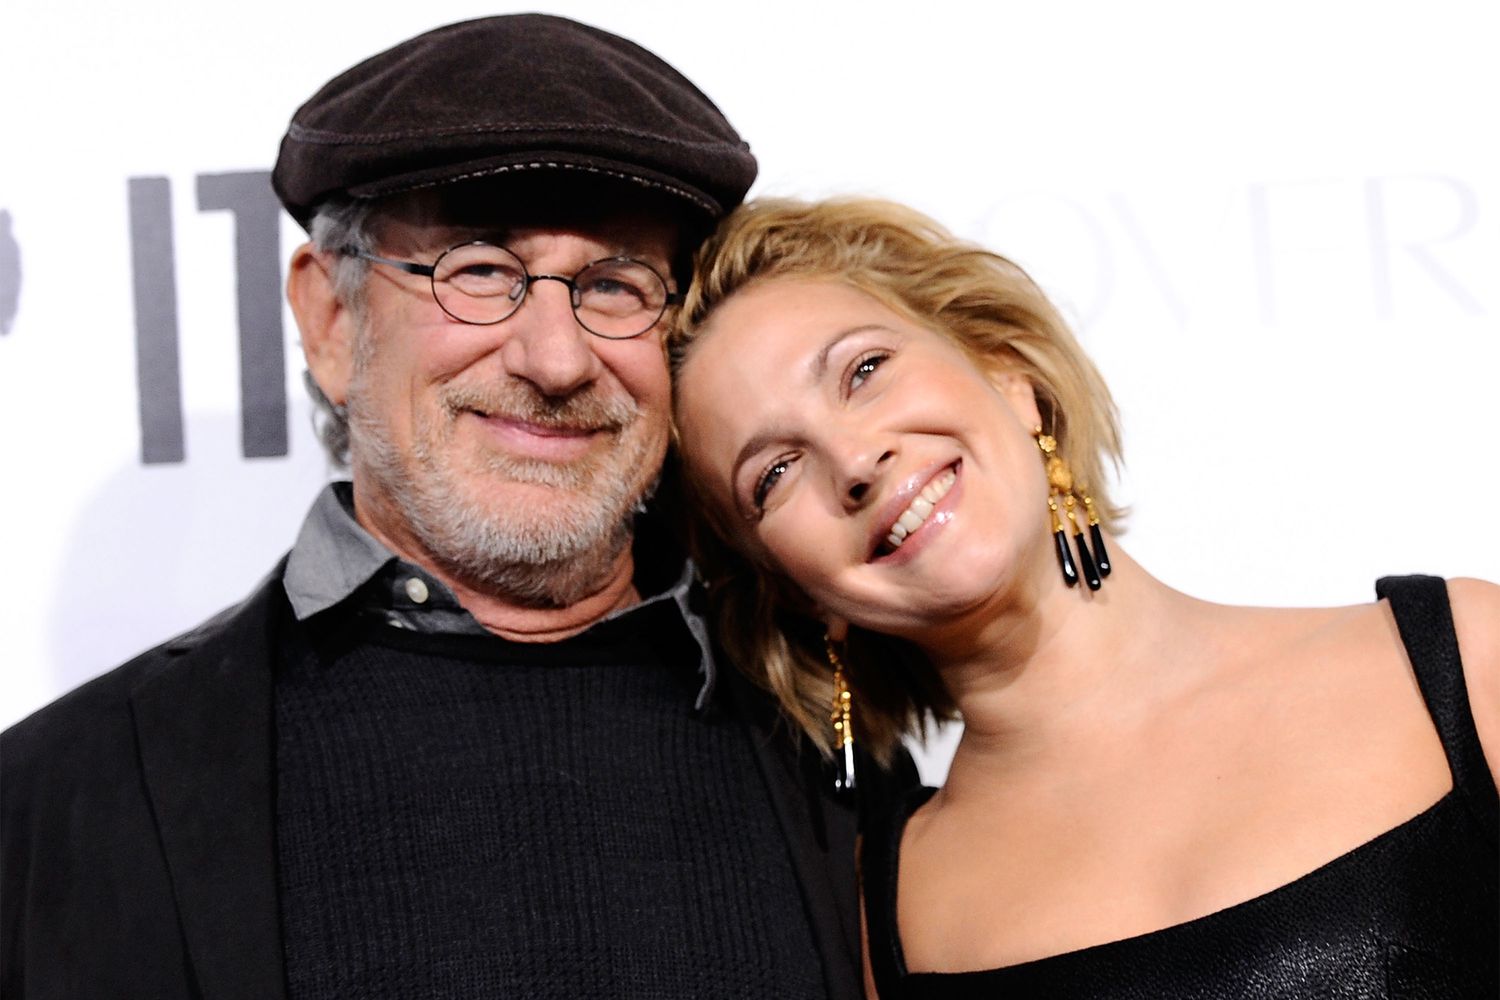 Drew Barrymore asked Steven Spielberg to be her dad while making 'E.T.'